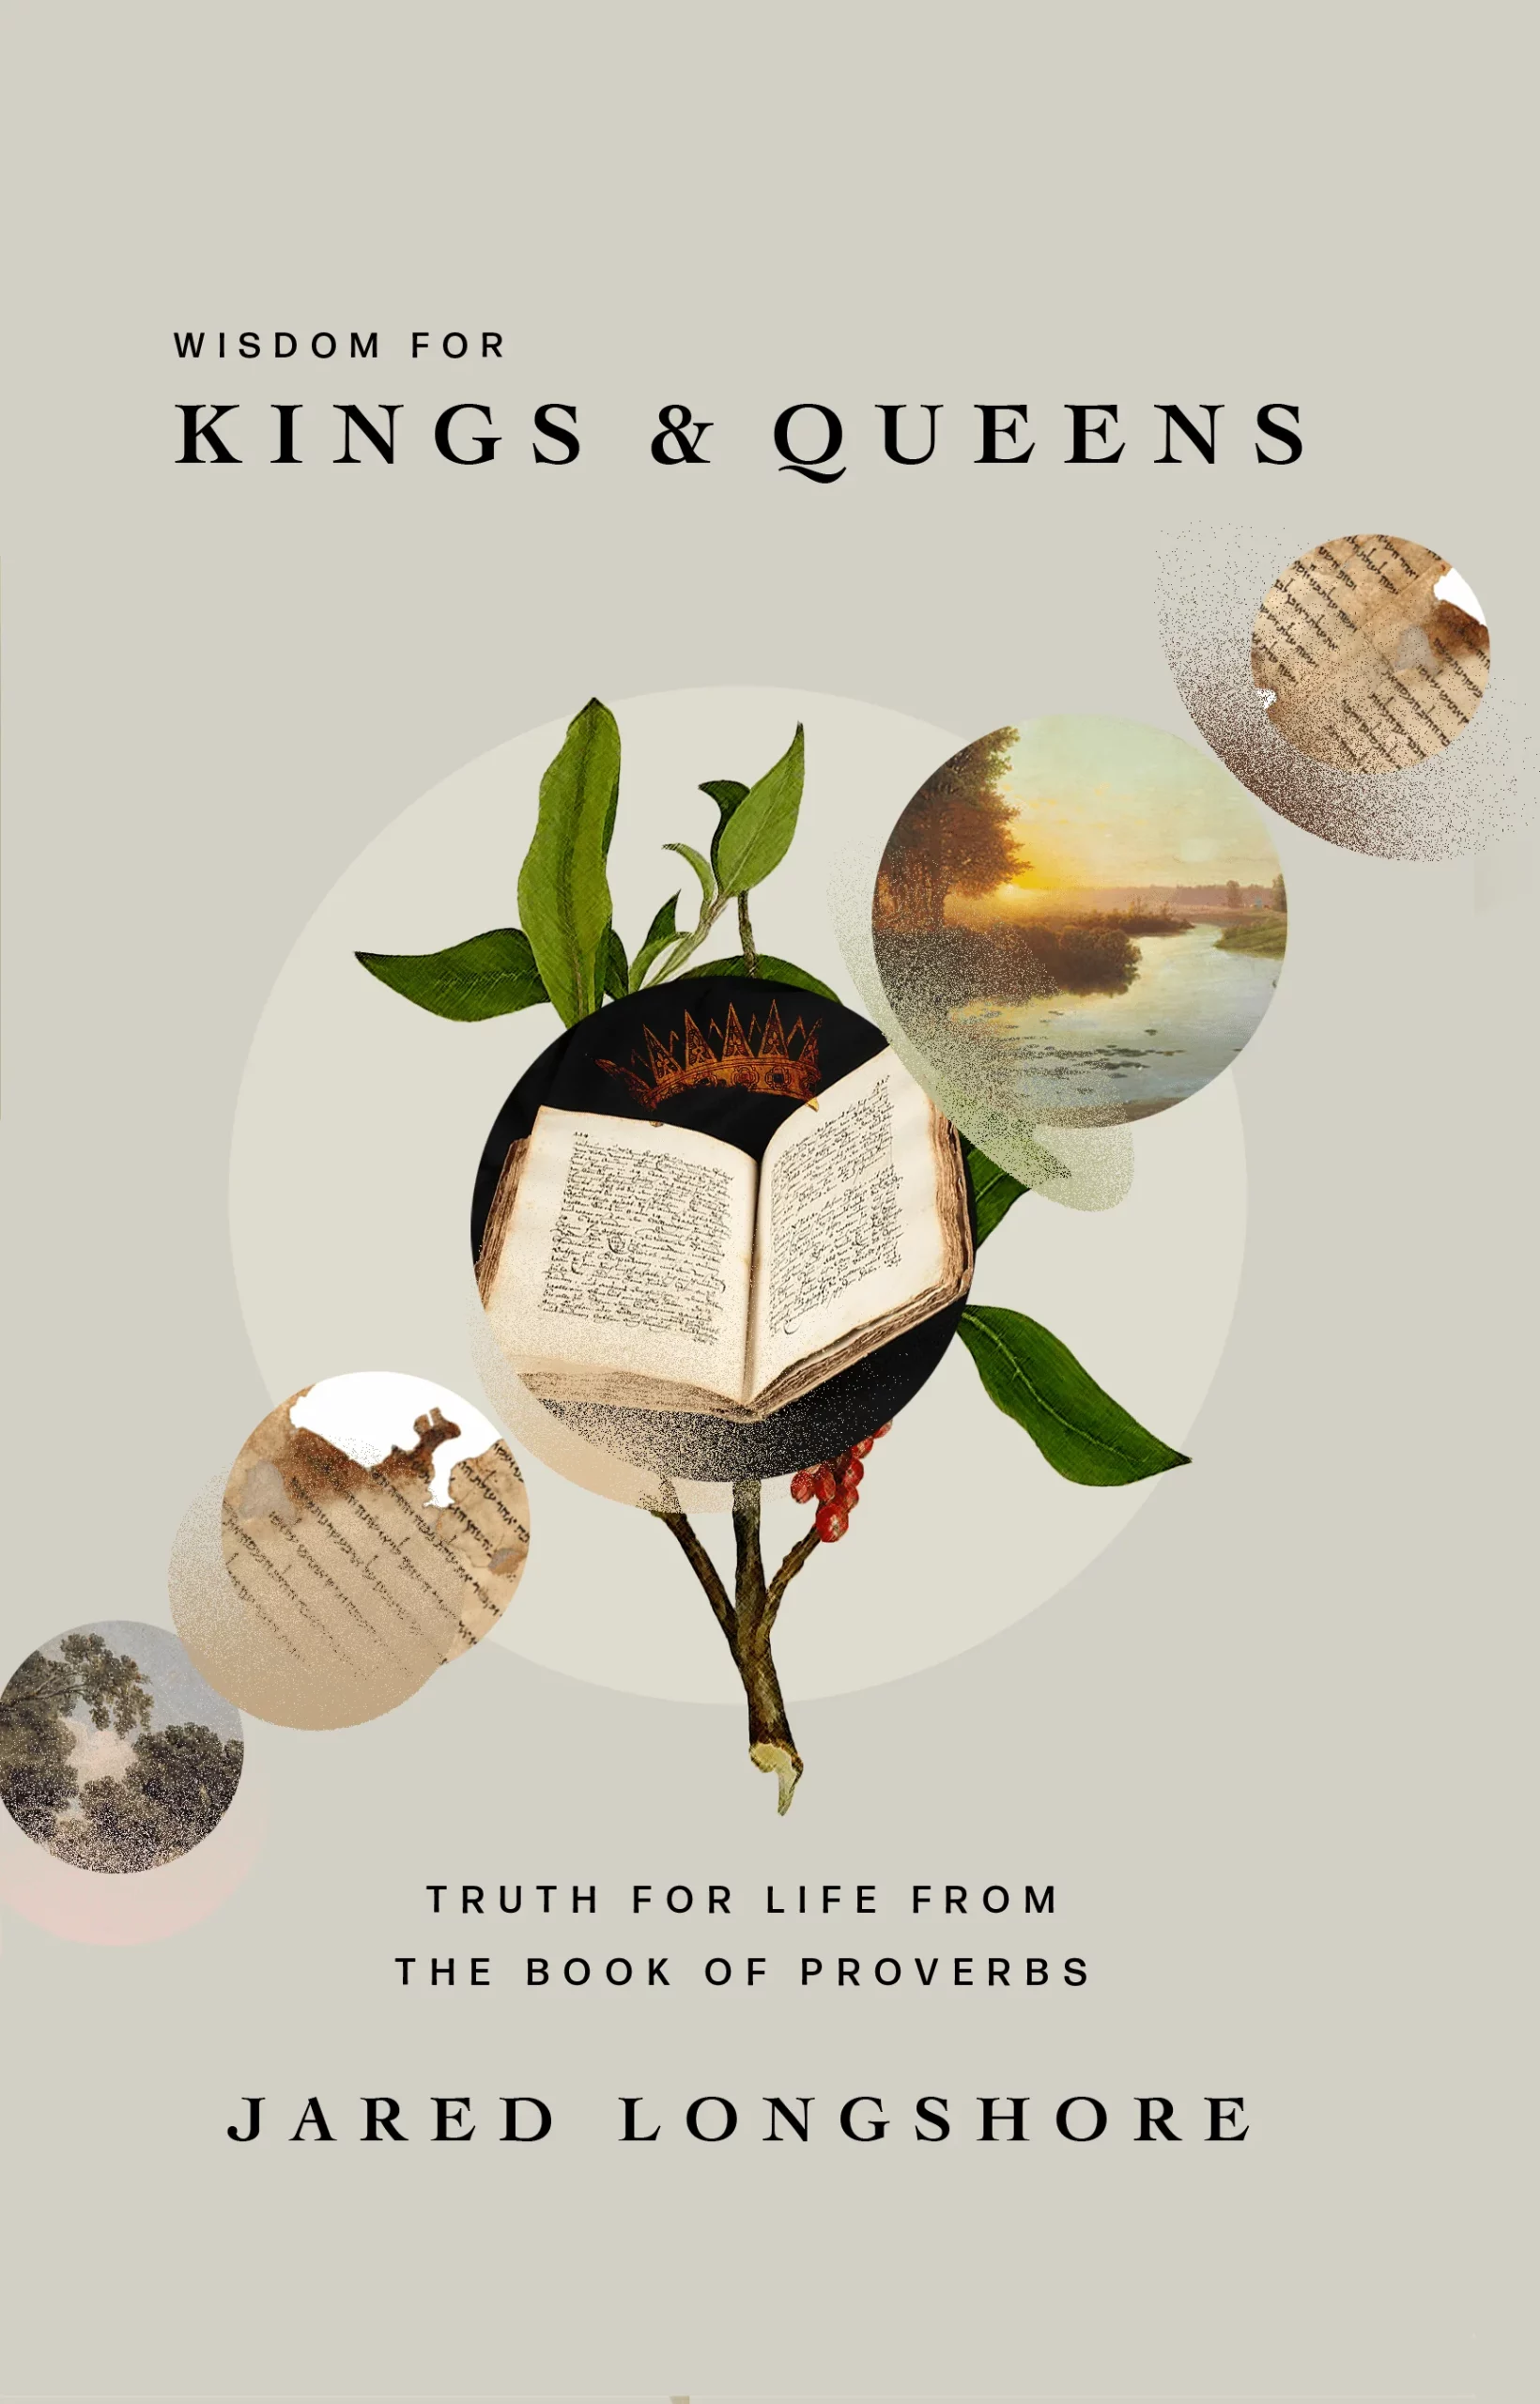 jared-longshore-books-paperback-wisdom-for-kings-and-queens-truth-for-life-from-the-book-of-proverbs-30319059763248